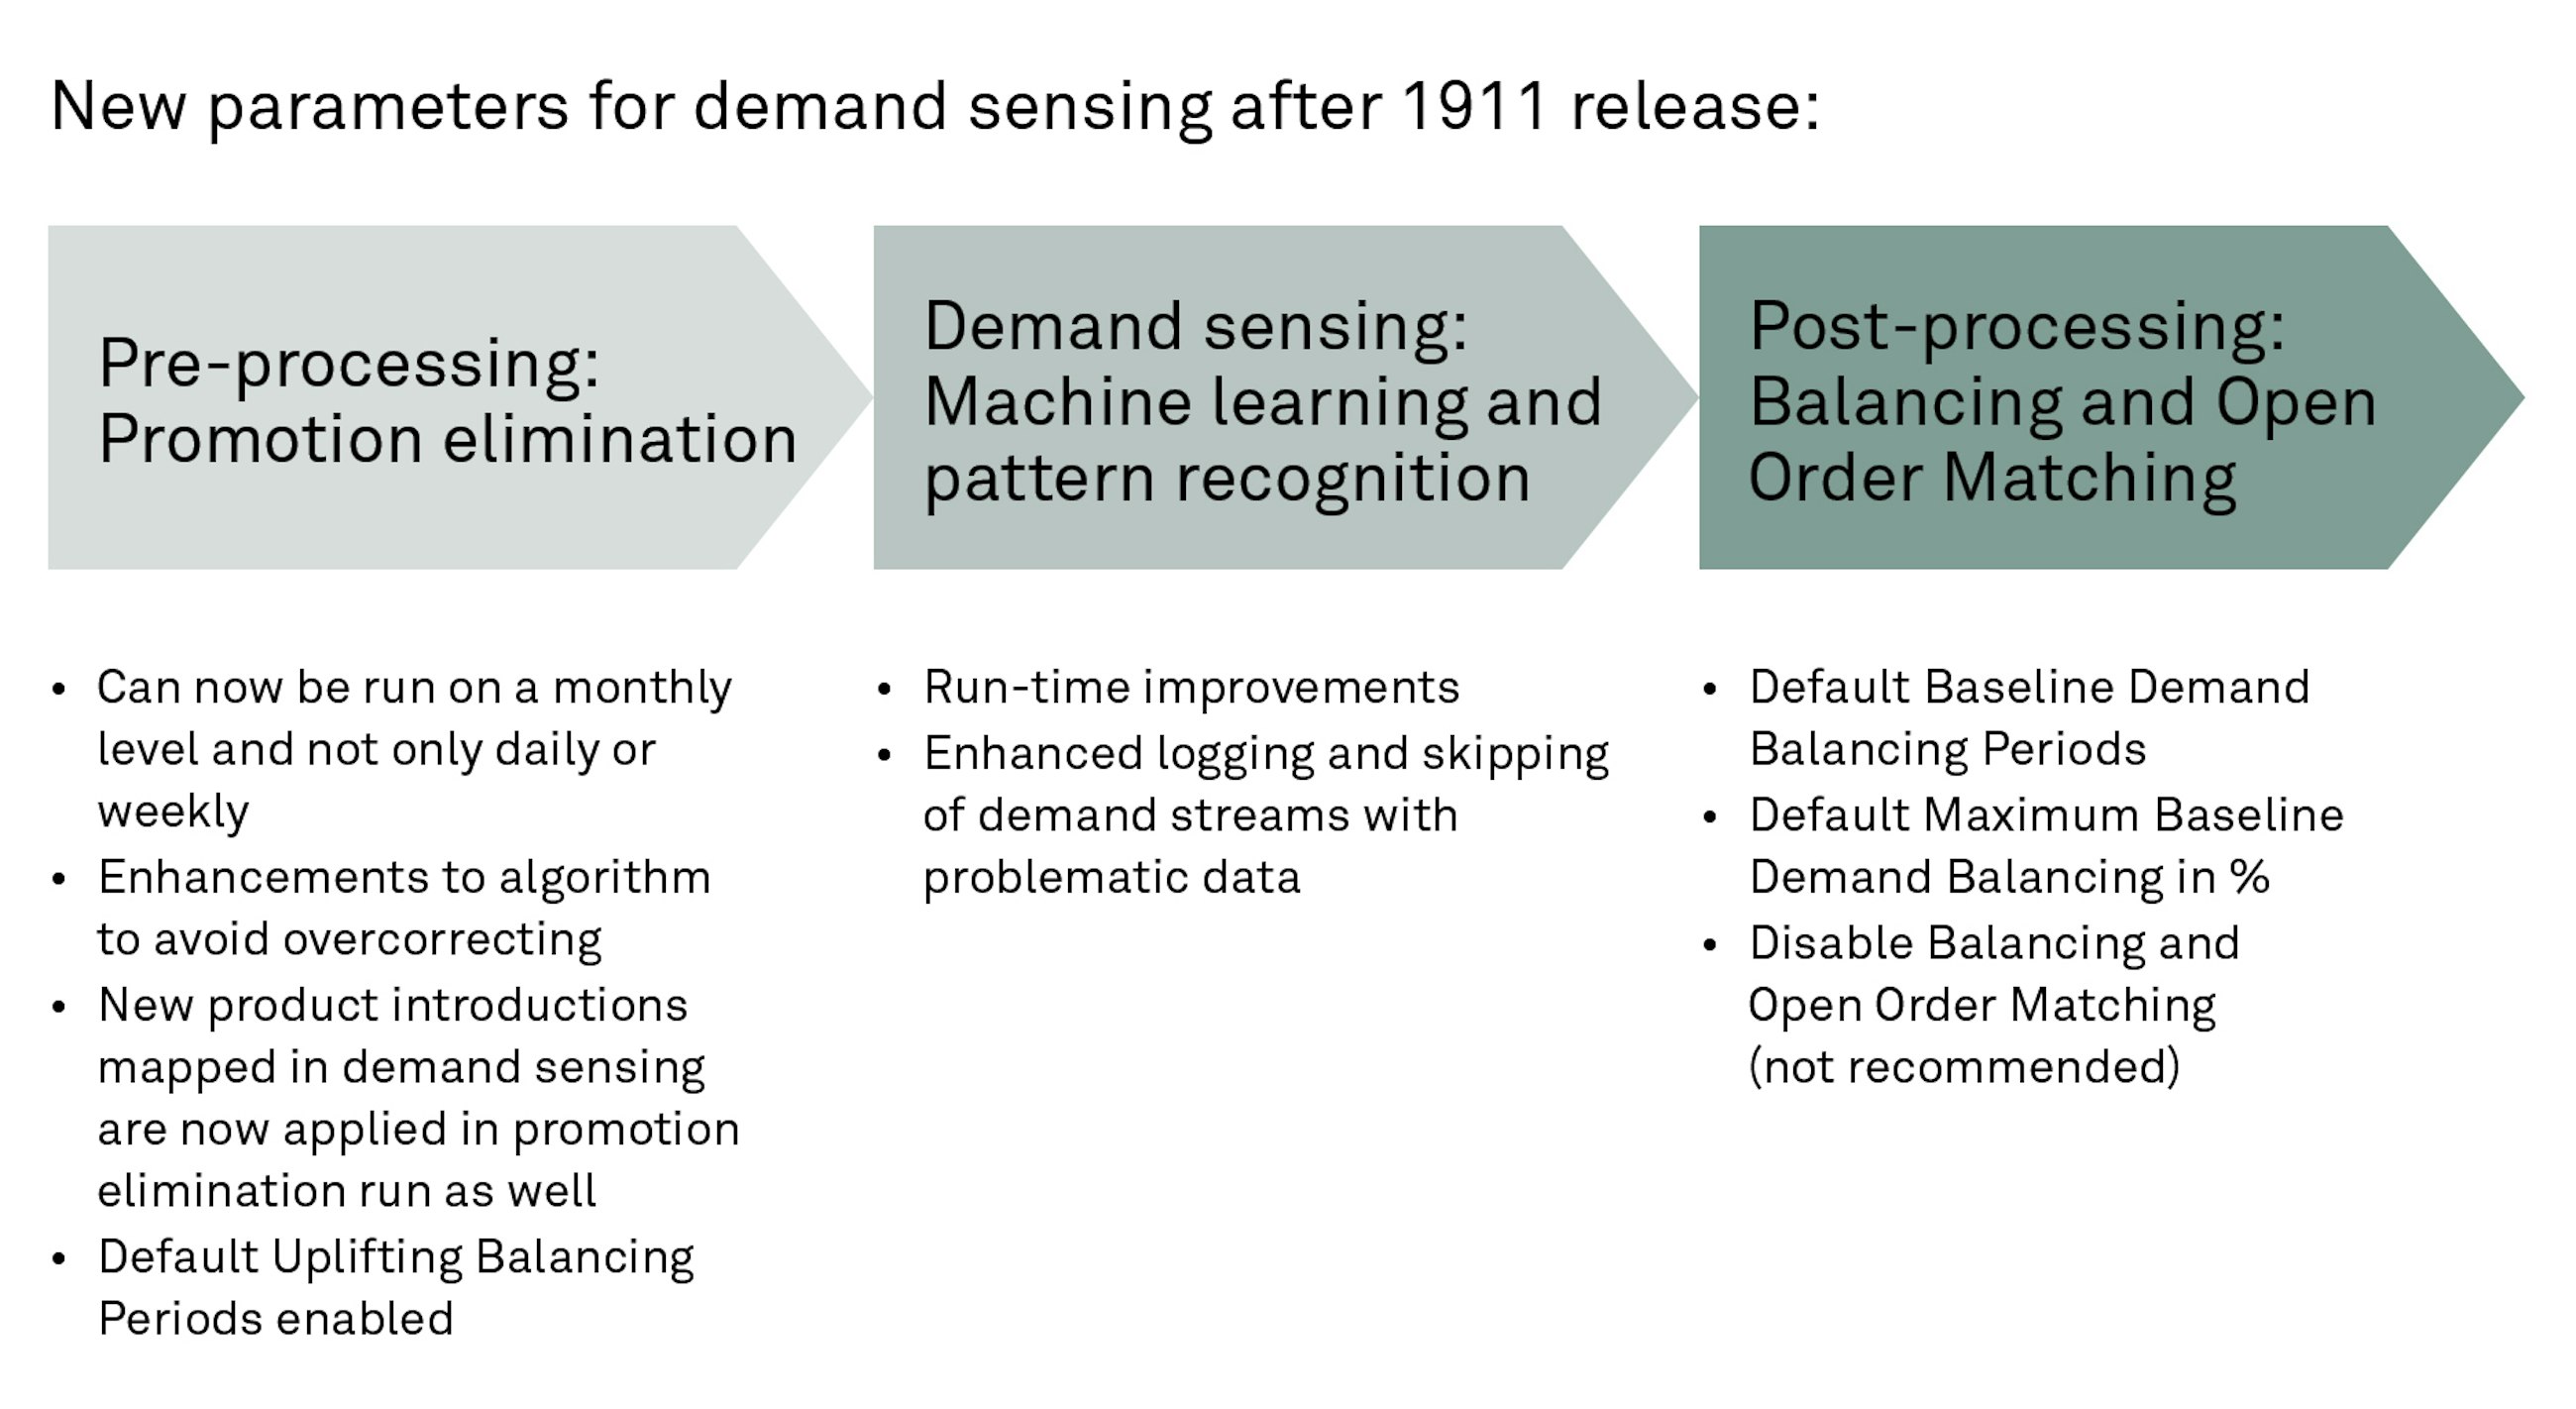 New parameters for demand sensing after the 1911 release